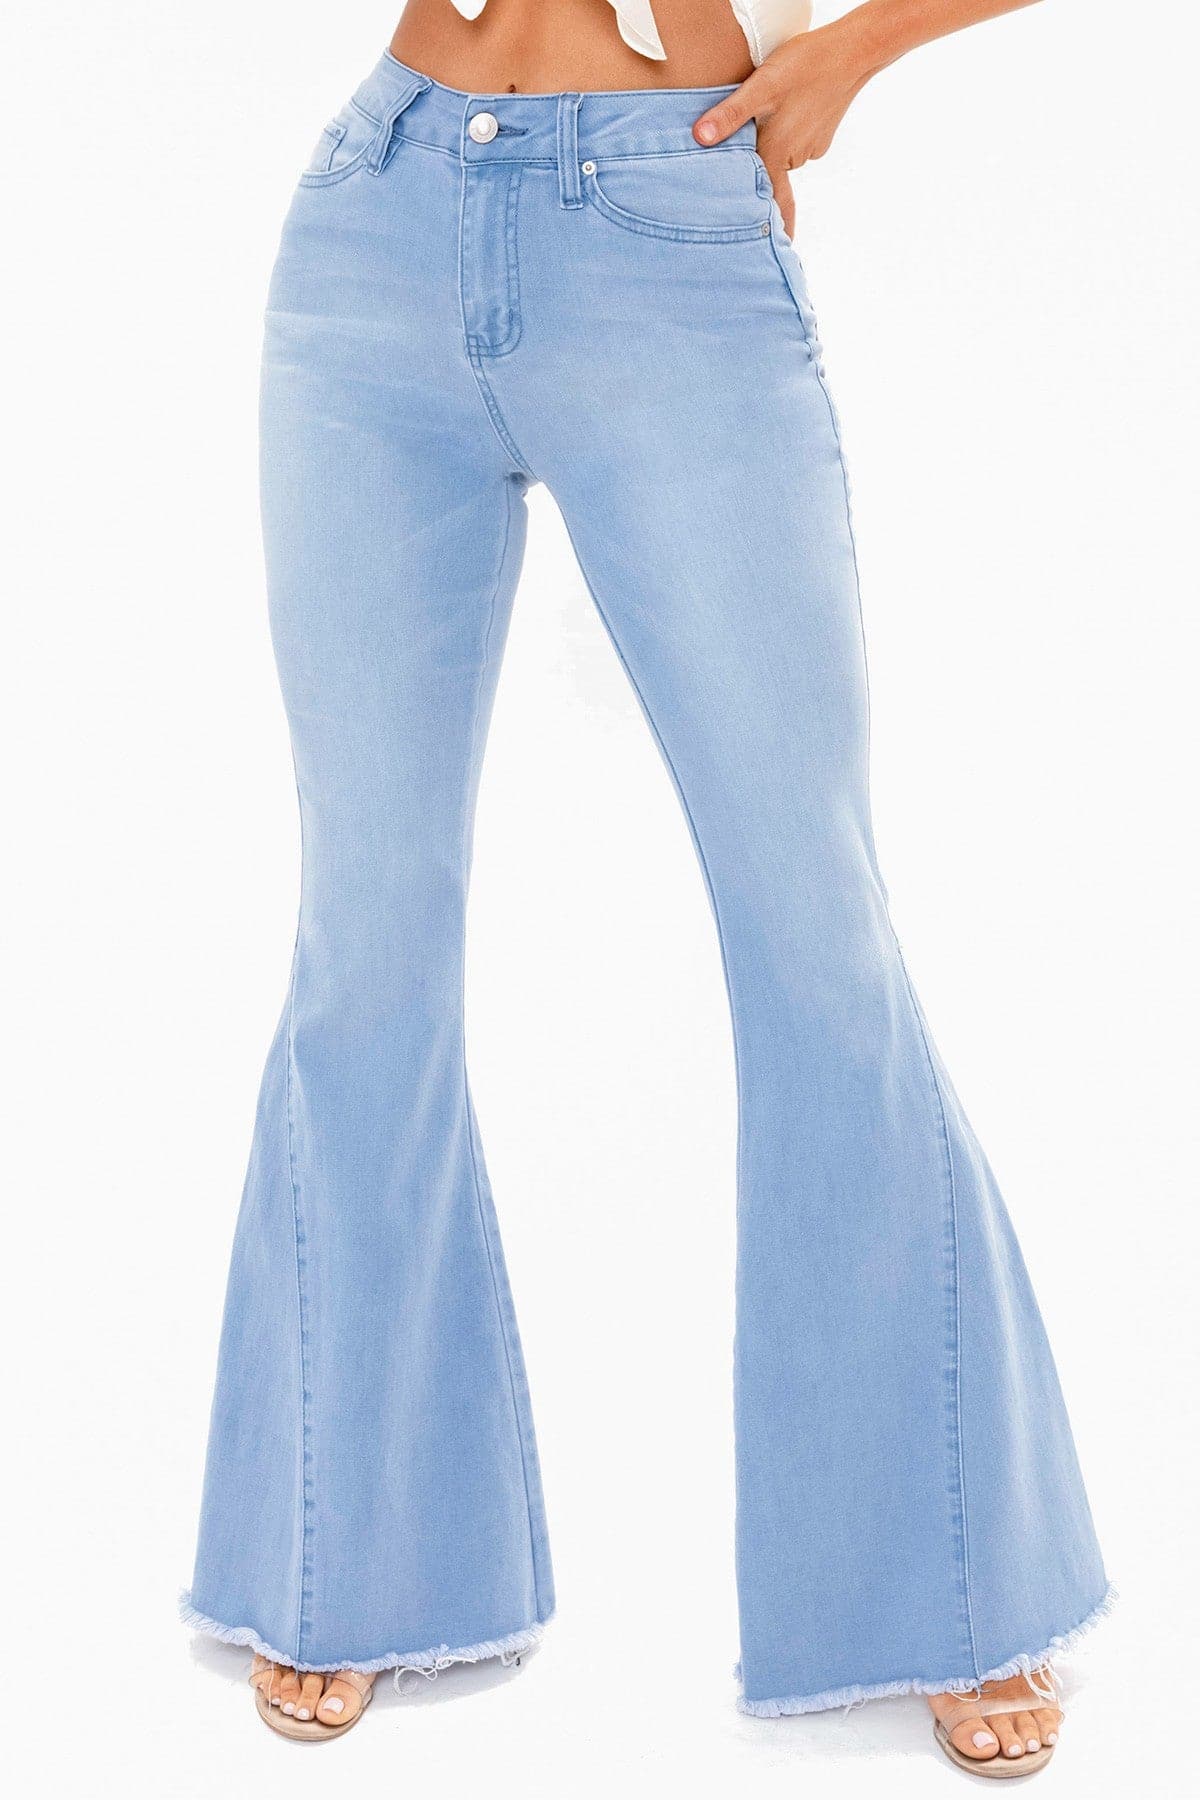 Women's High-Rise Extreme Flare Jeans